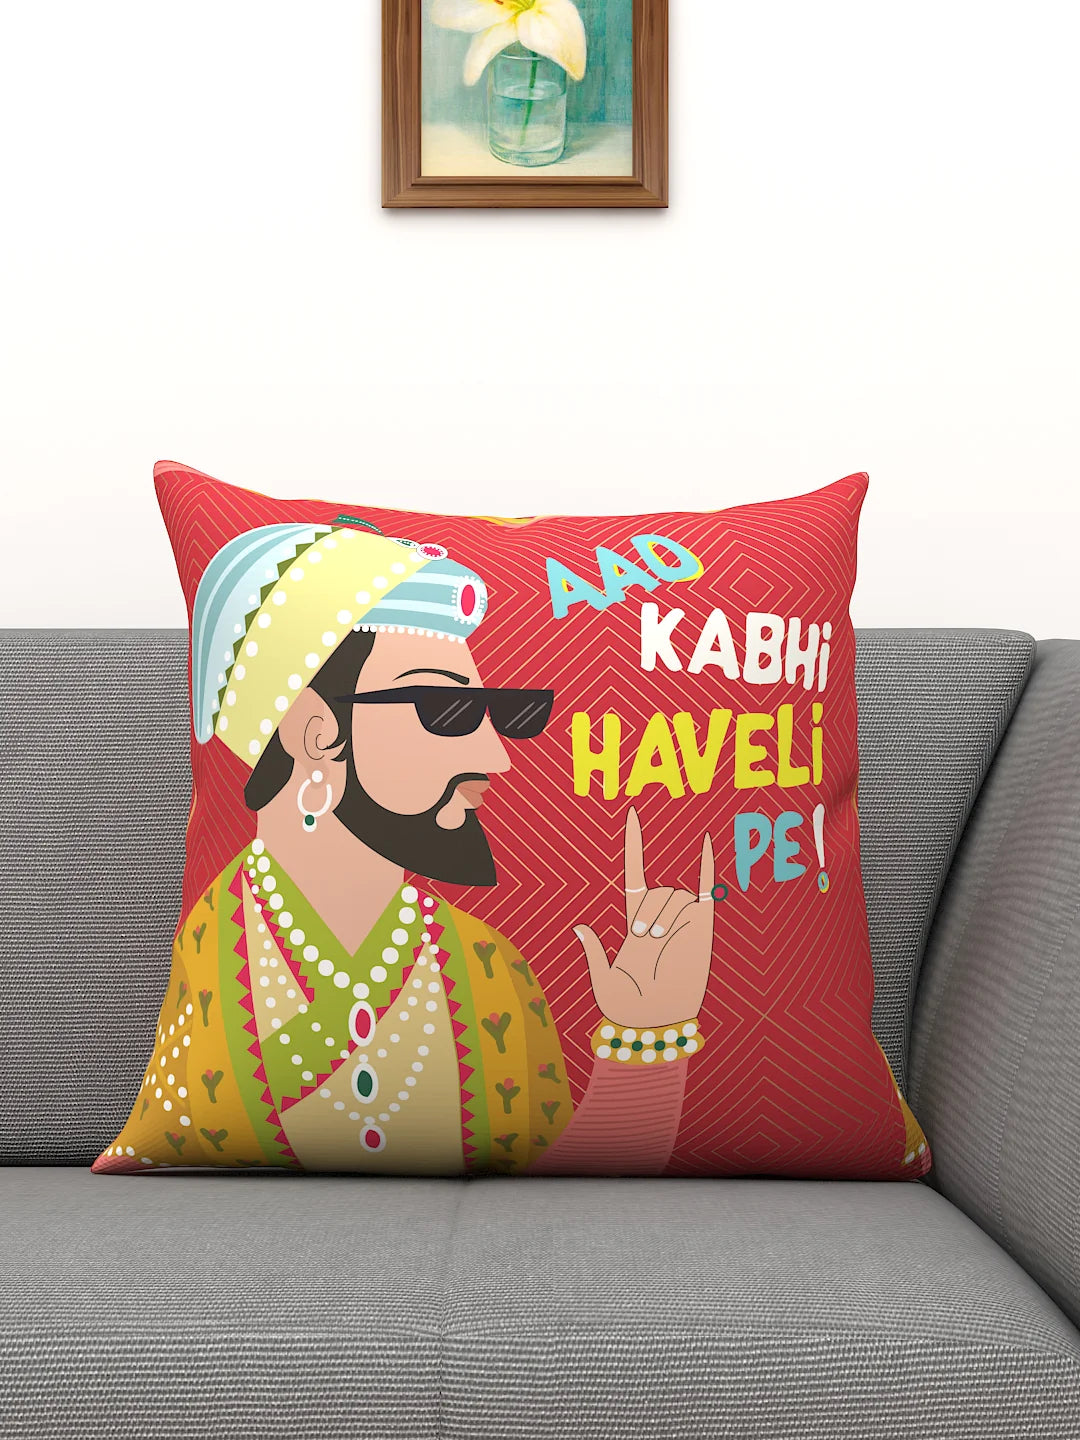 Transform Your Space with Athom Living's Indie Aao Kabhi Haveli Pe! Filled Cushion